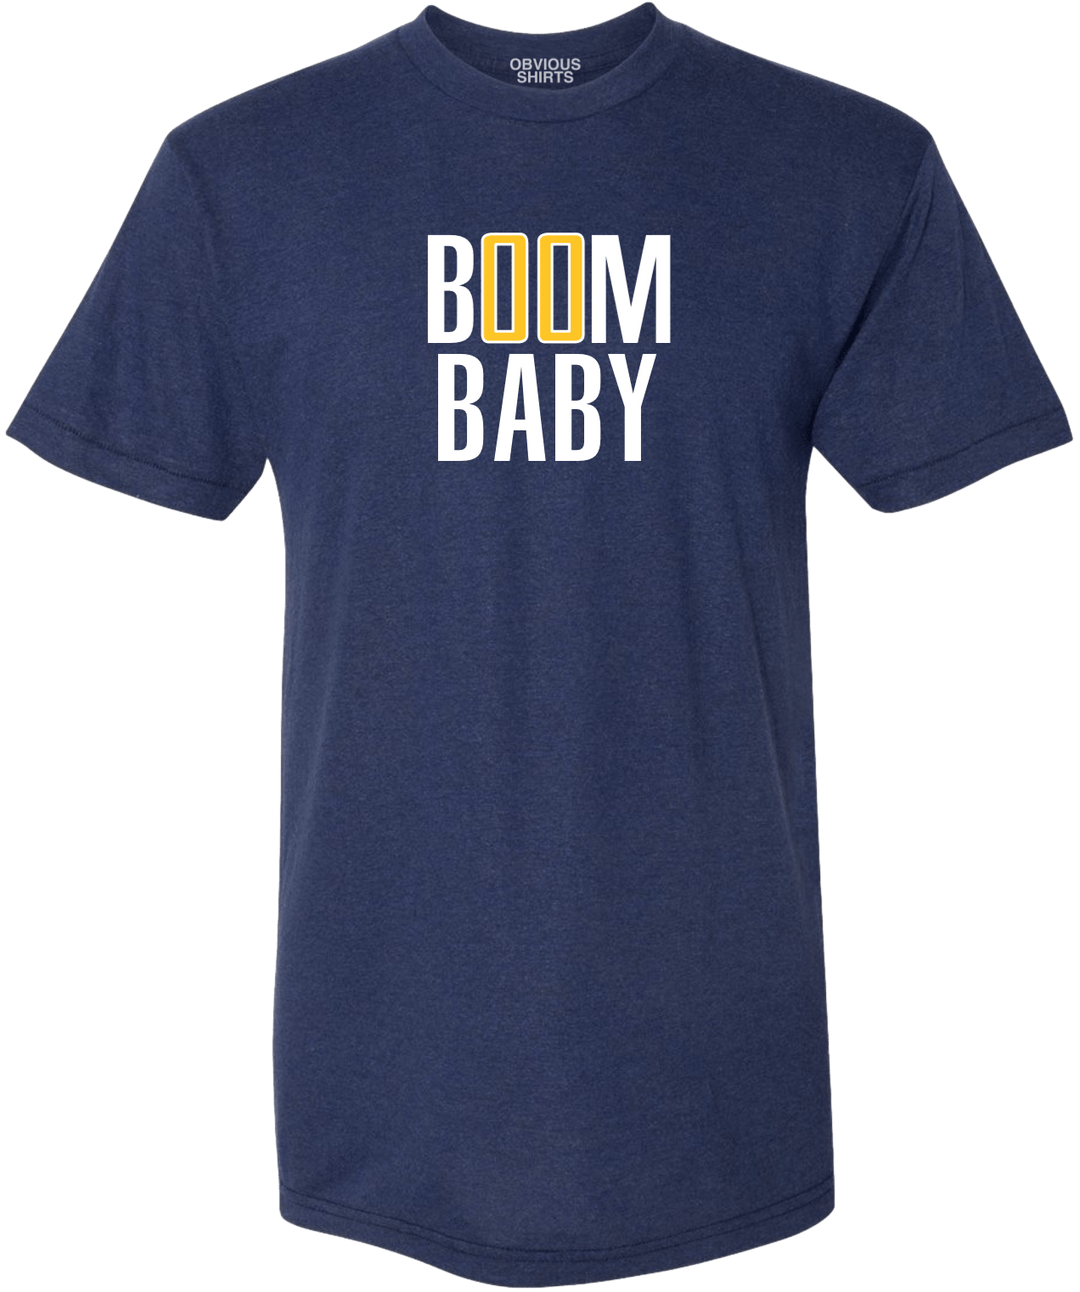 BOOM BABY. - OBVIOUS SHIRTS